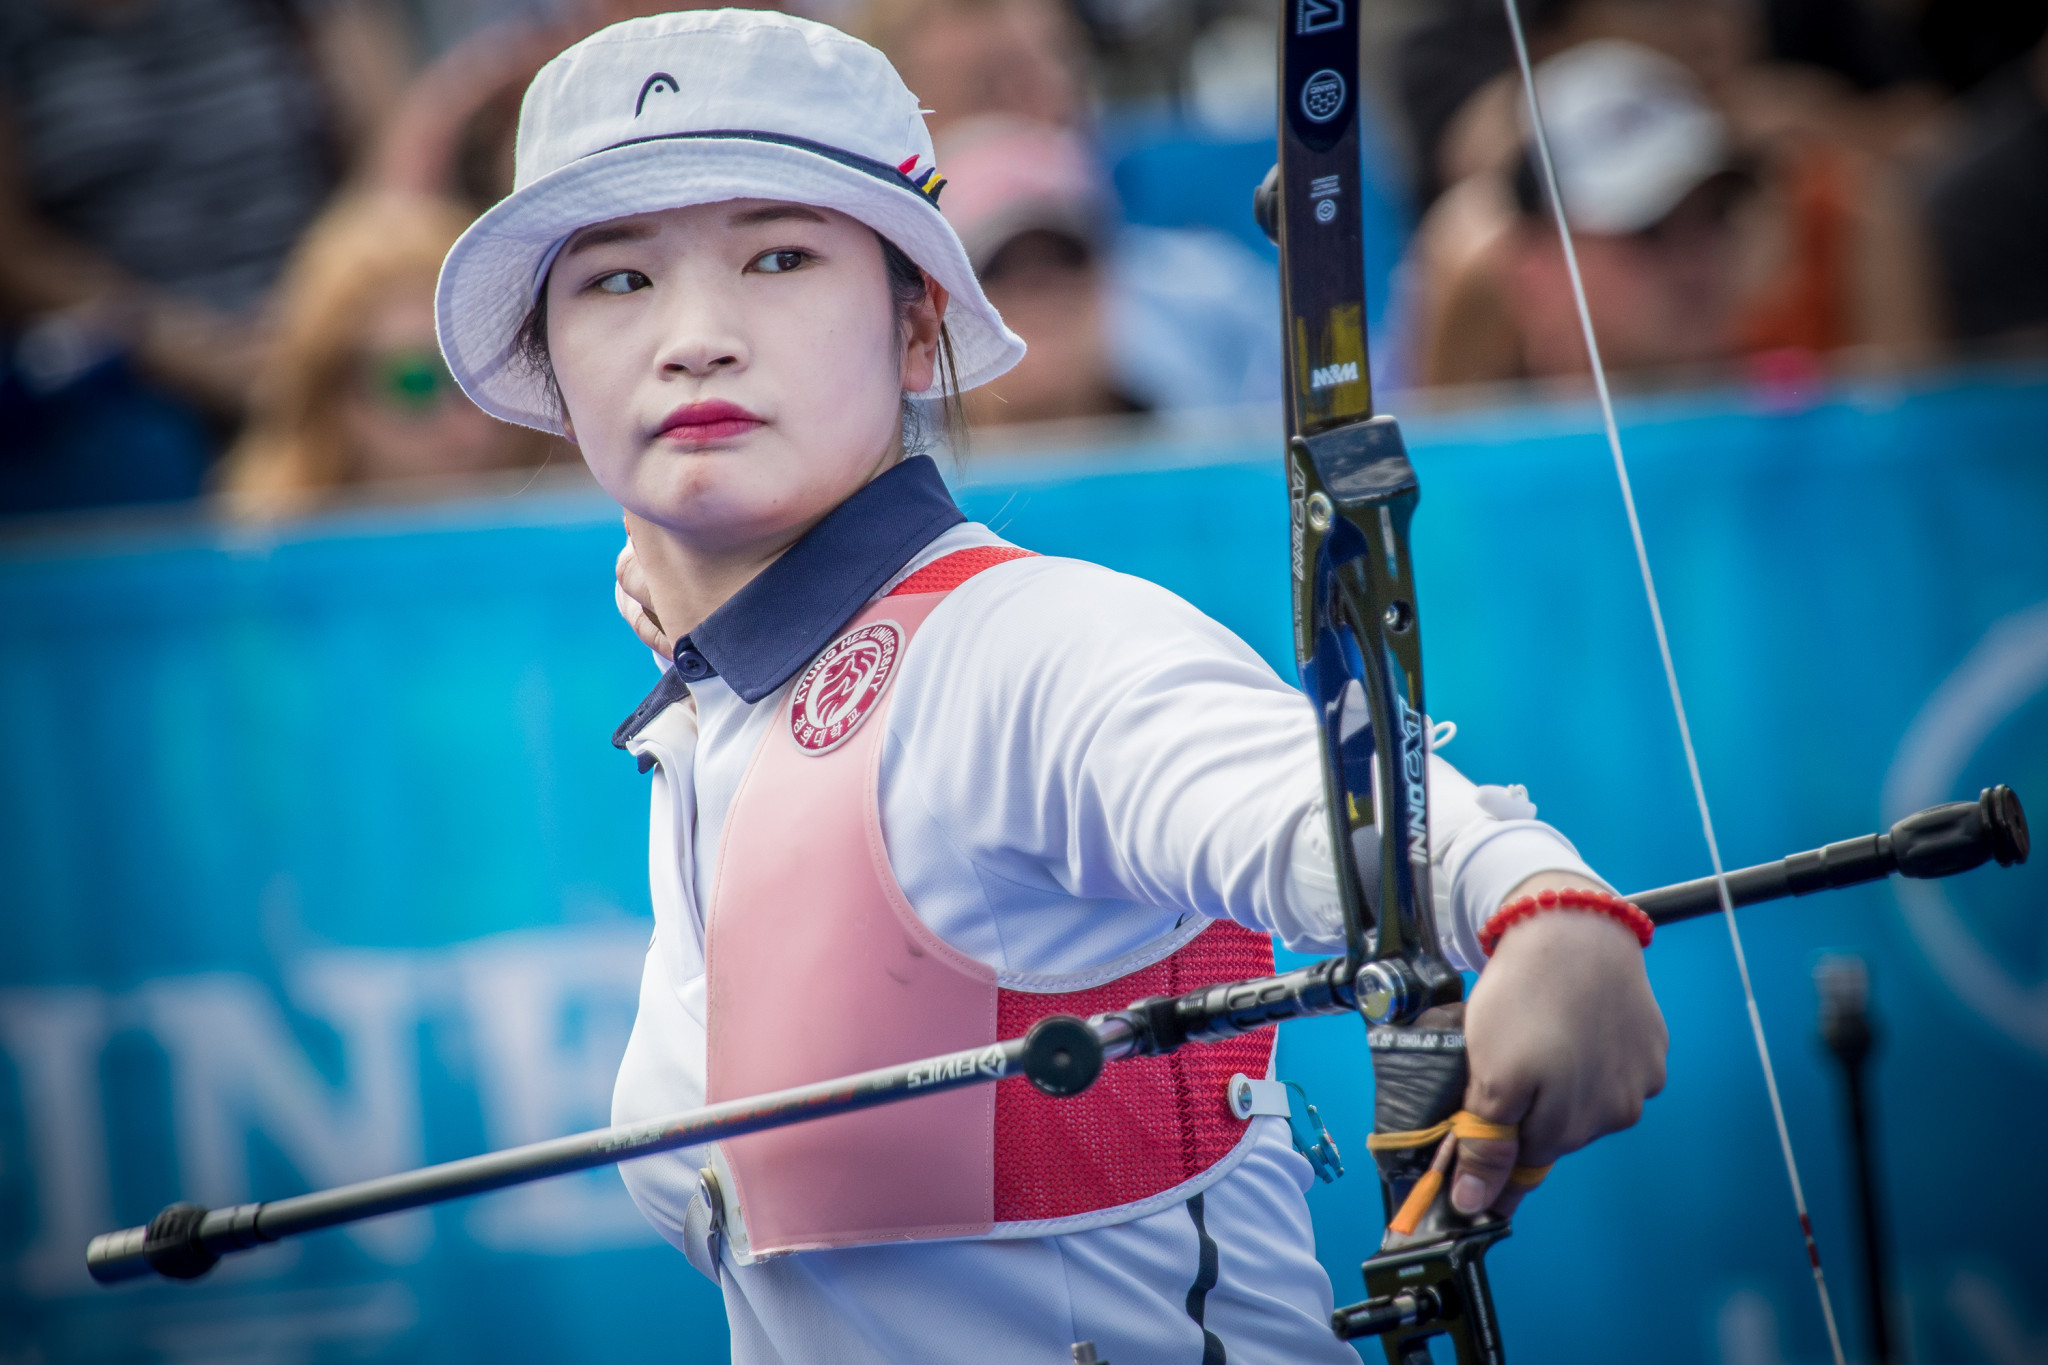 Kang wins with ease at Indoor Archery World Series event in Nîmes